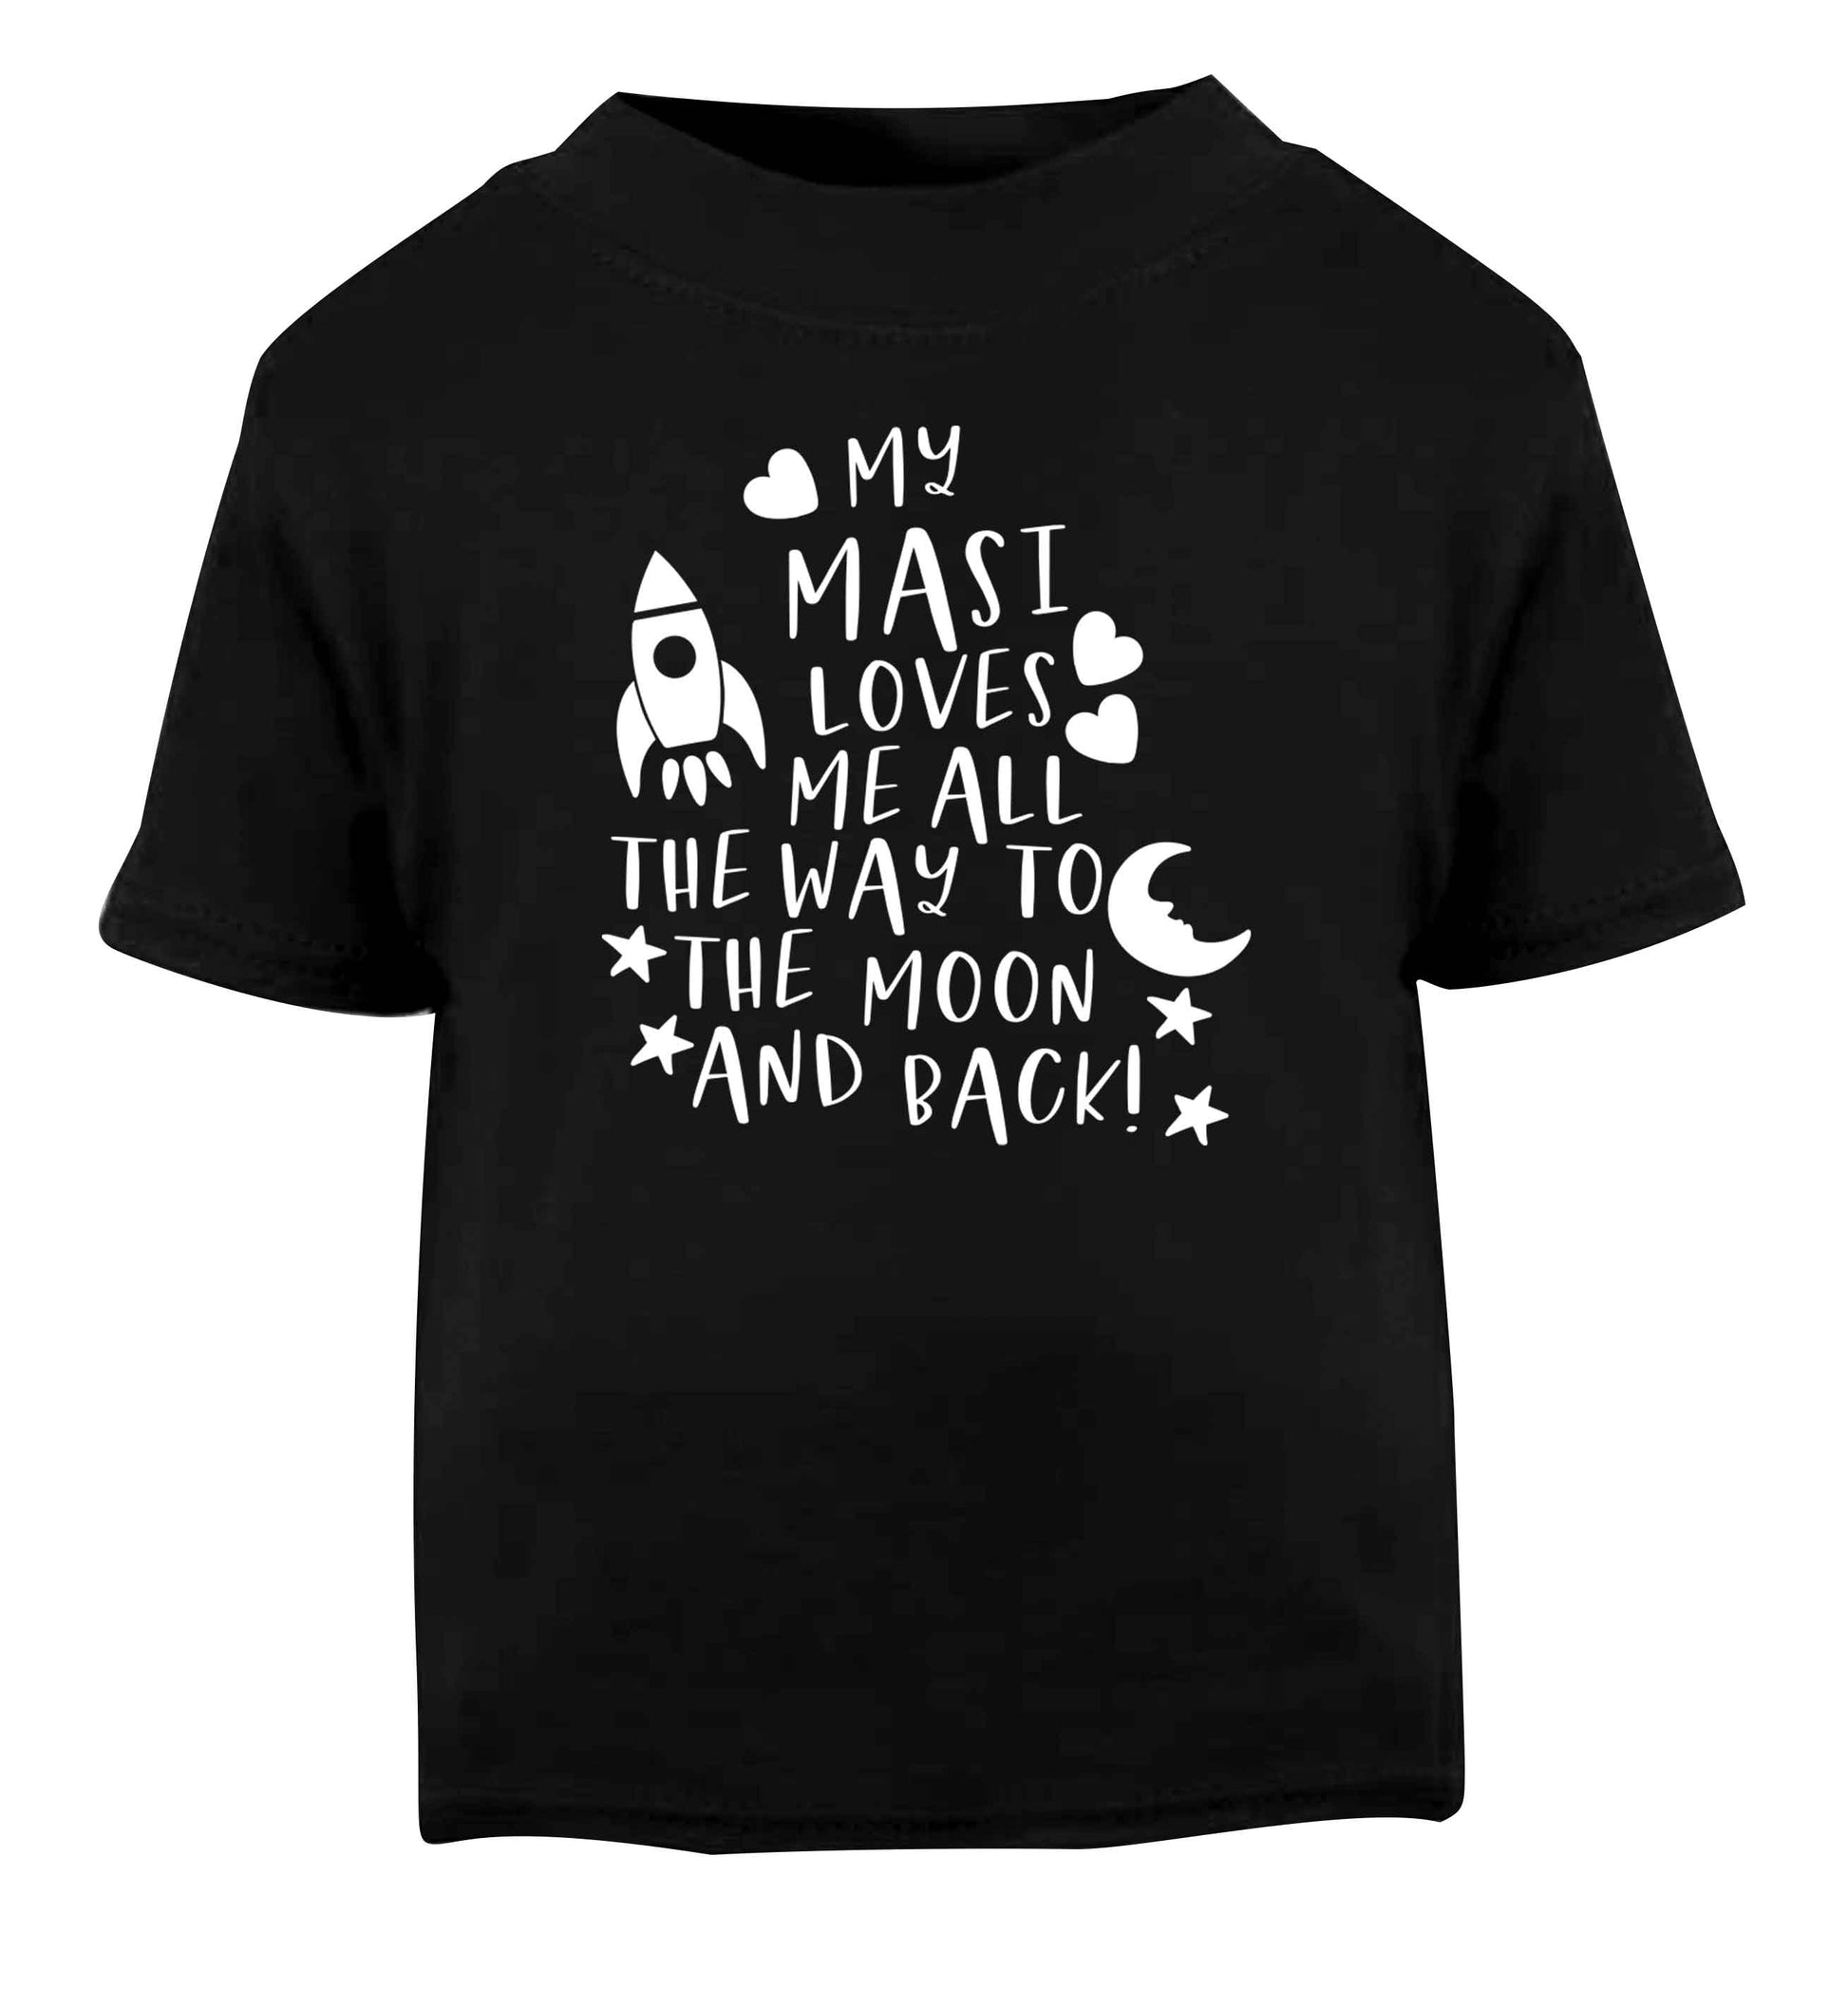 My masi loves me all the way to the moon and back Black Baby Toddler Tshirt 2 years